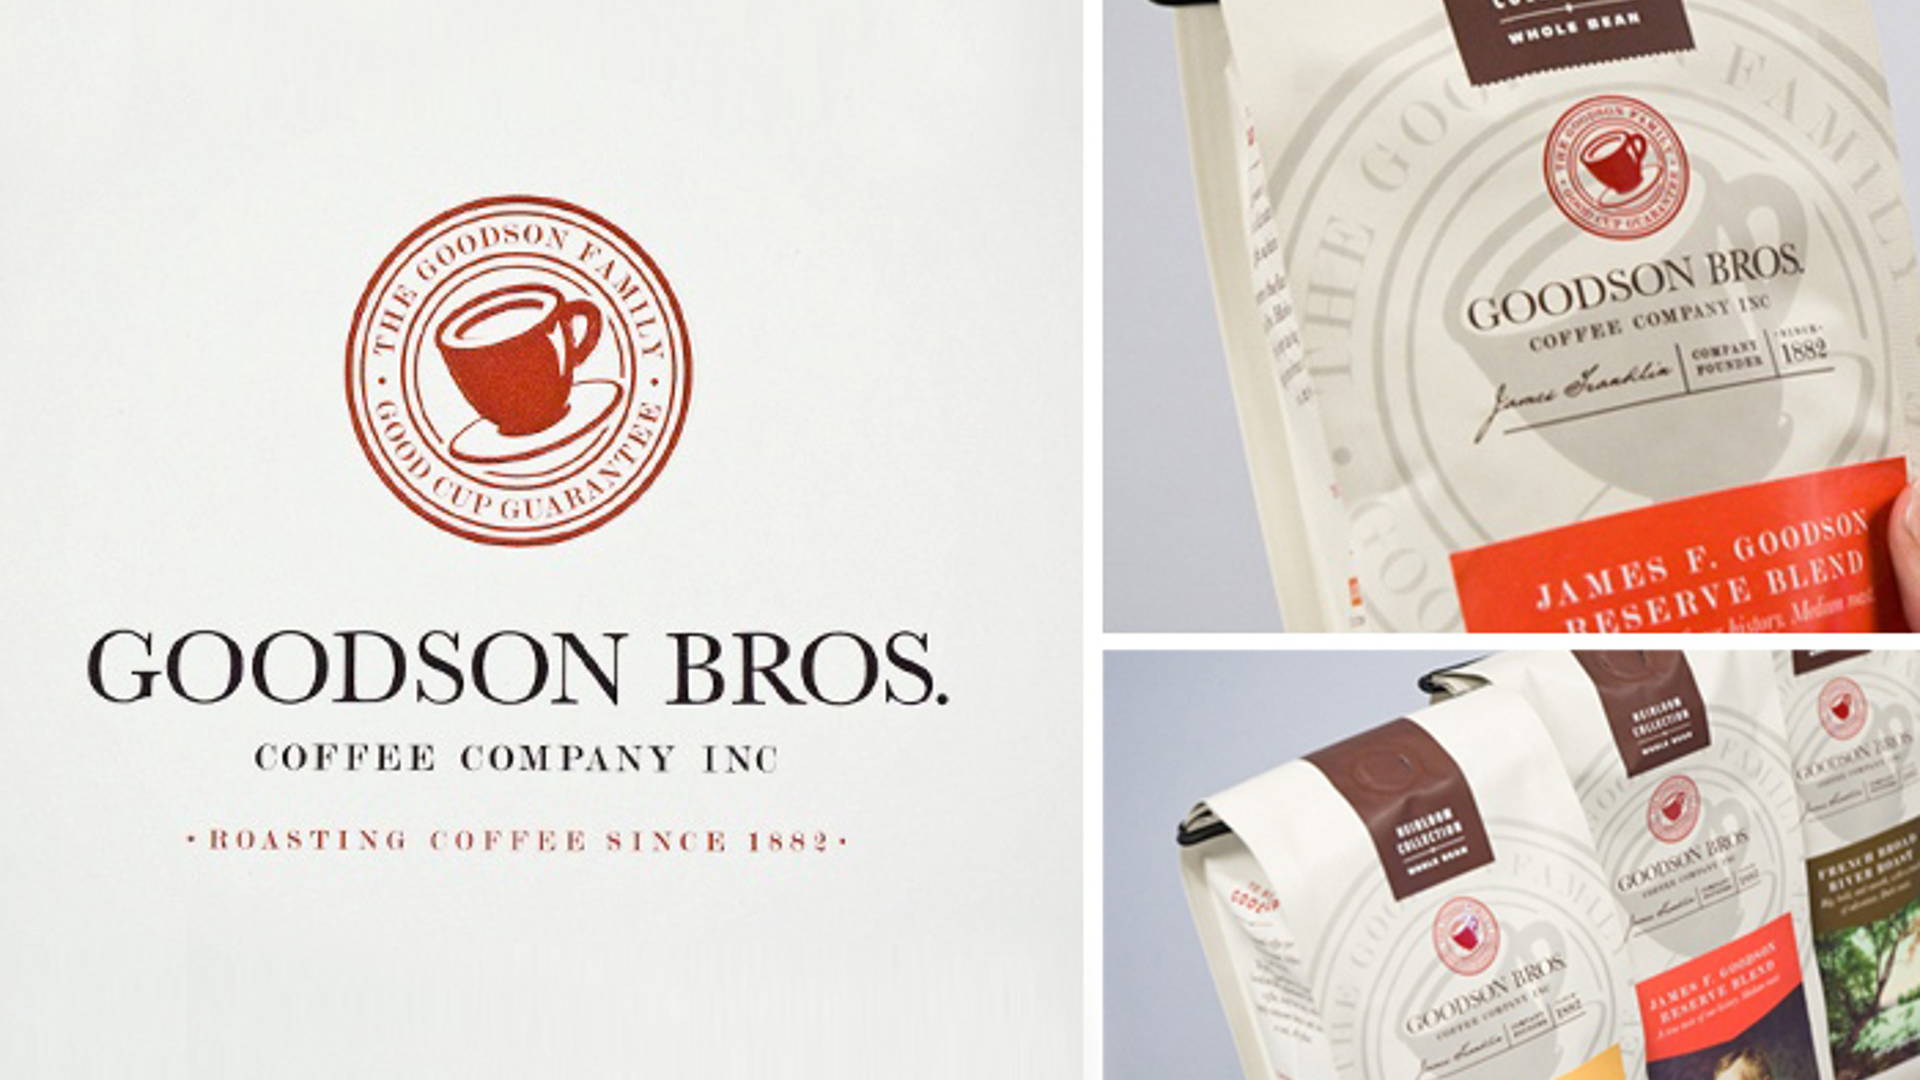 Featured image for Goodson Bros. Coffee Company Inc